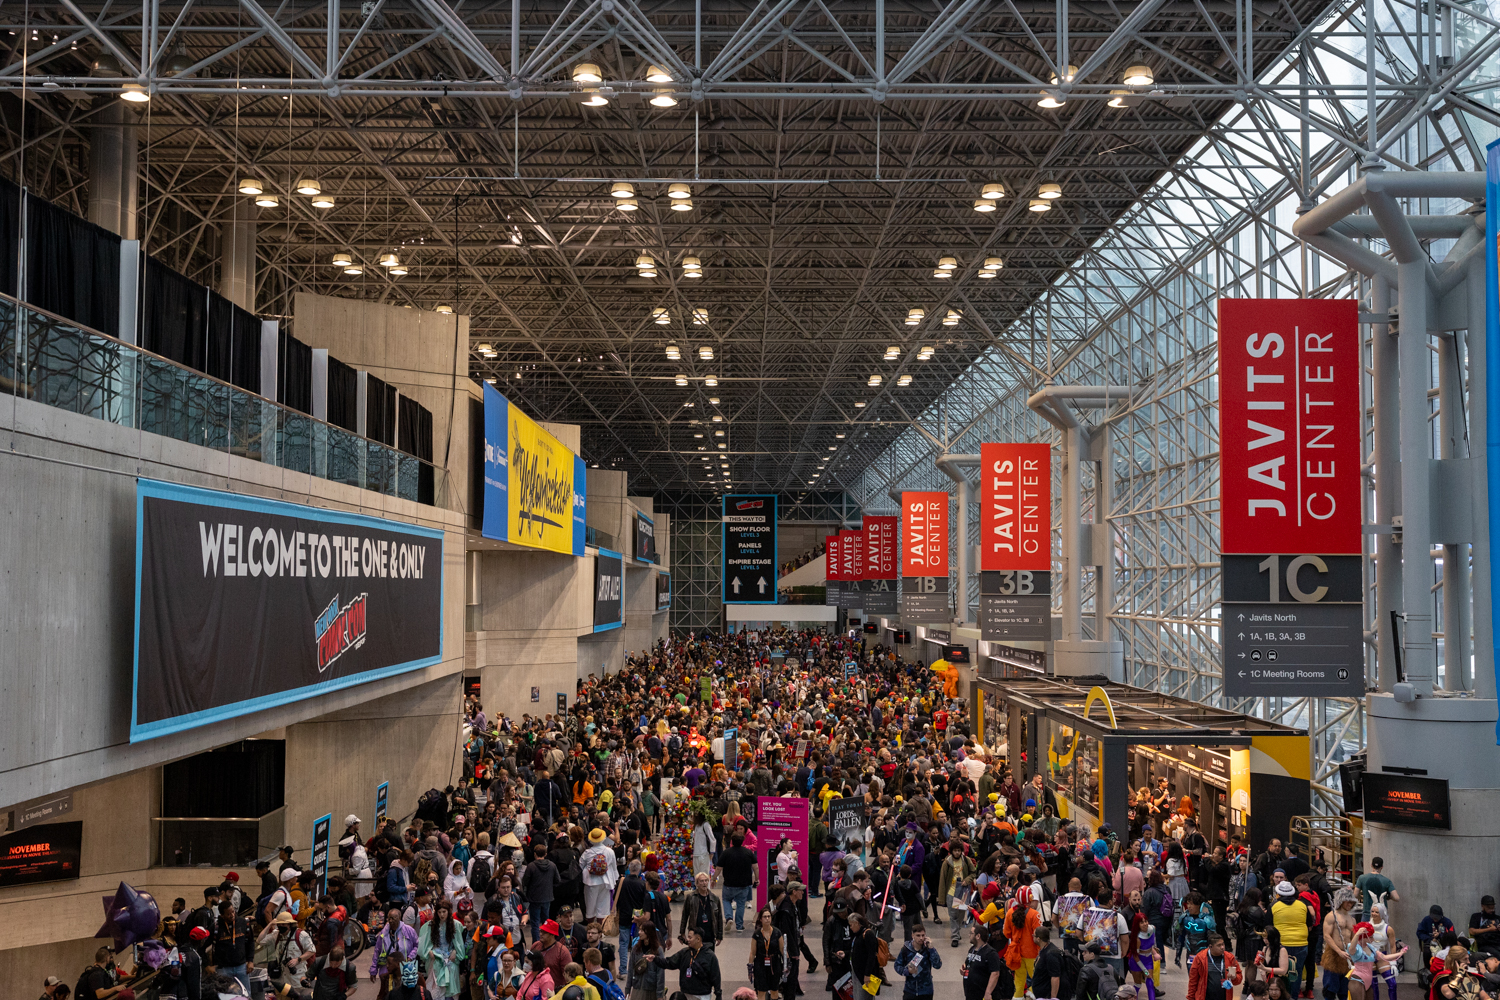 Thousands of Comic Con attendees gather in the Javits Center, many dressed in full costume.